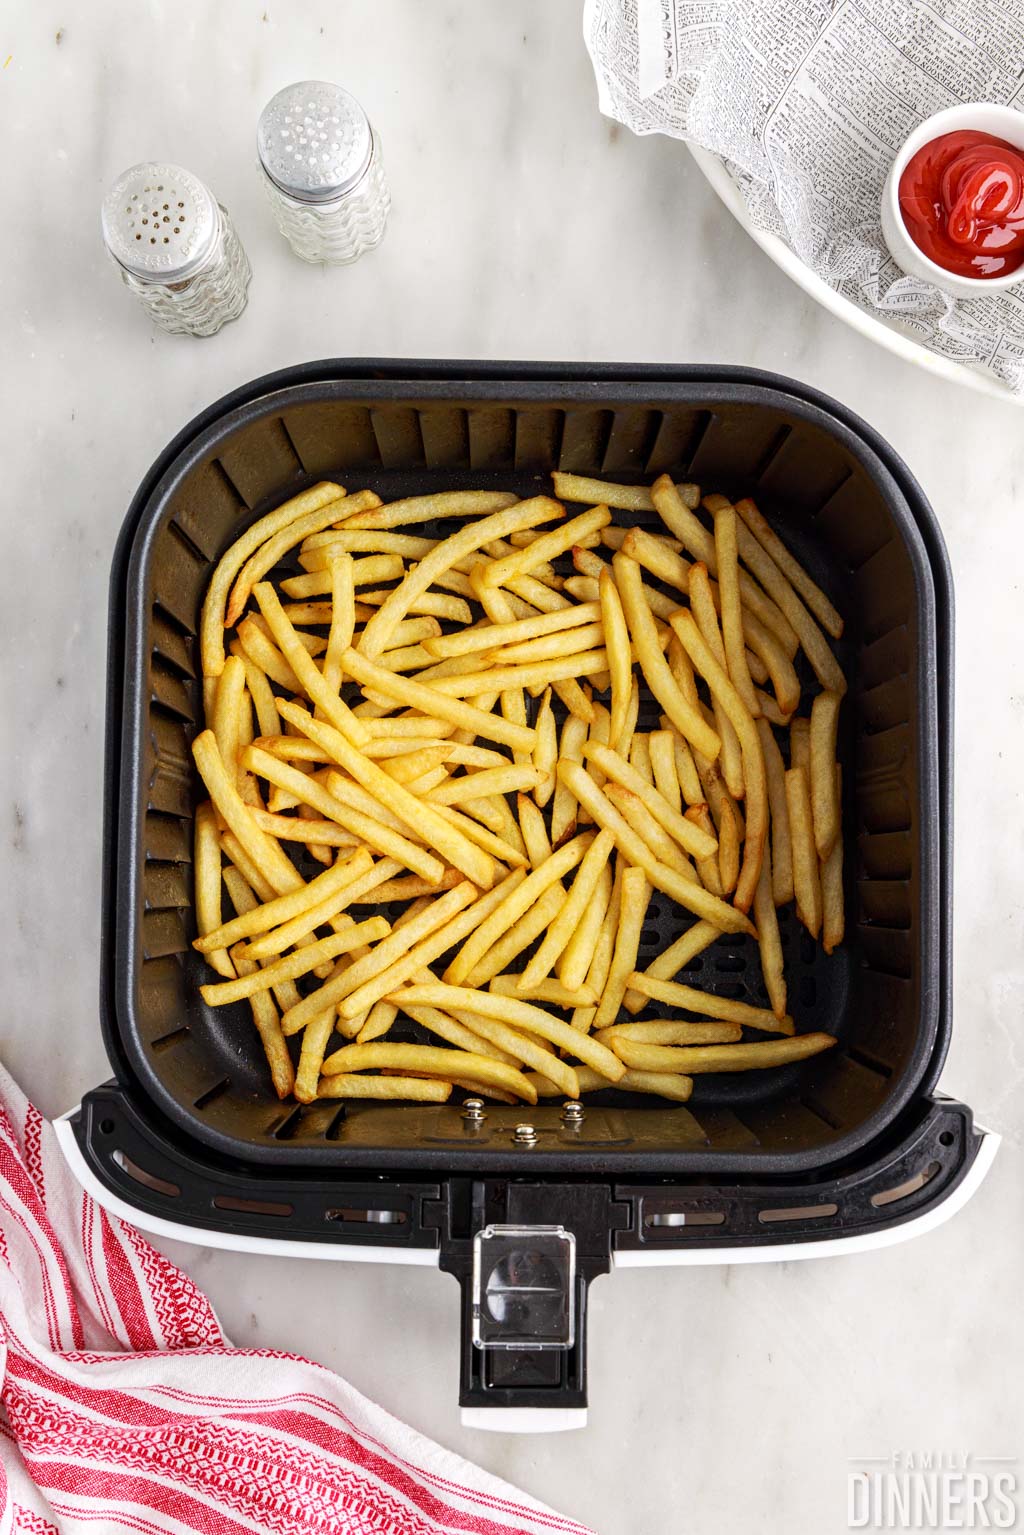 cooked french fries in air fryer.